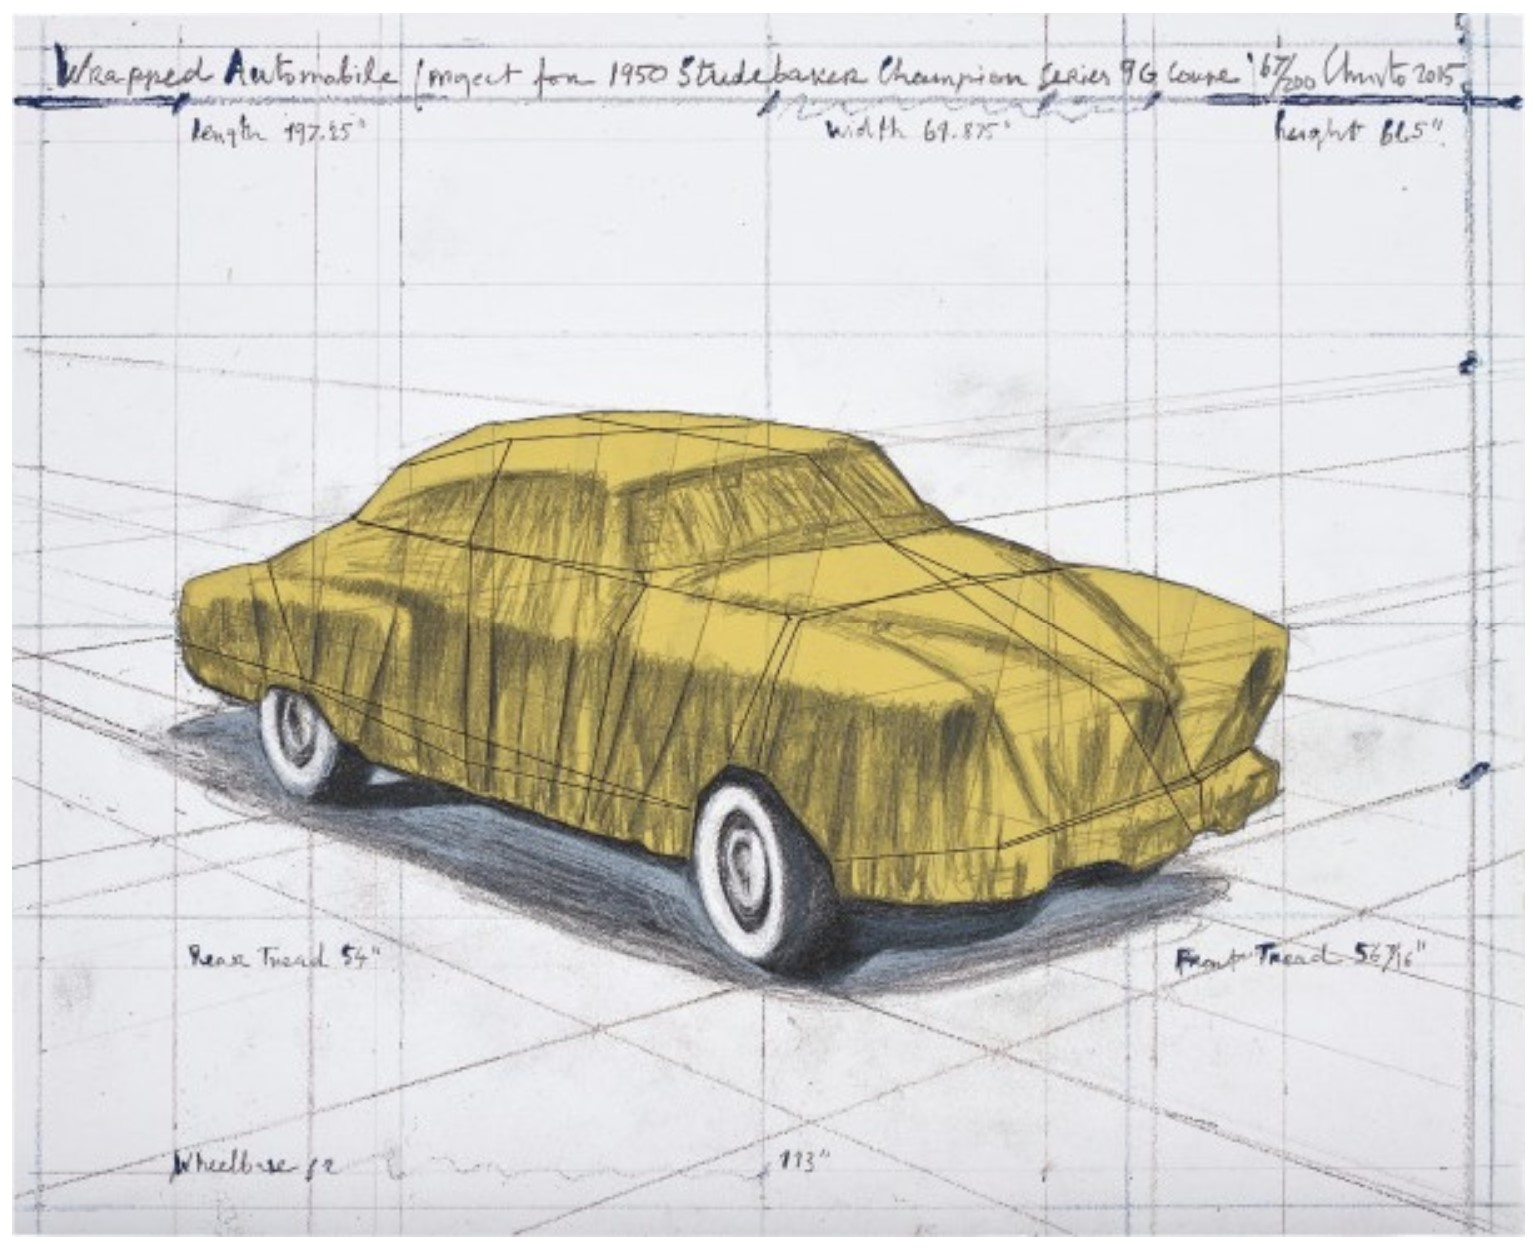 Wrapped Automobile (Project for 1950 Studebaker Champion Series 9G Coupe)